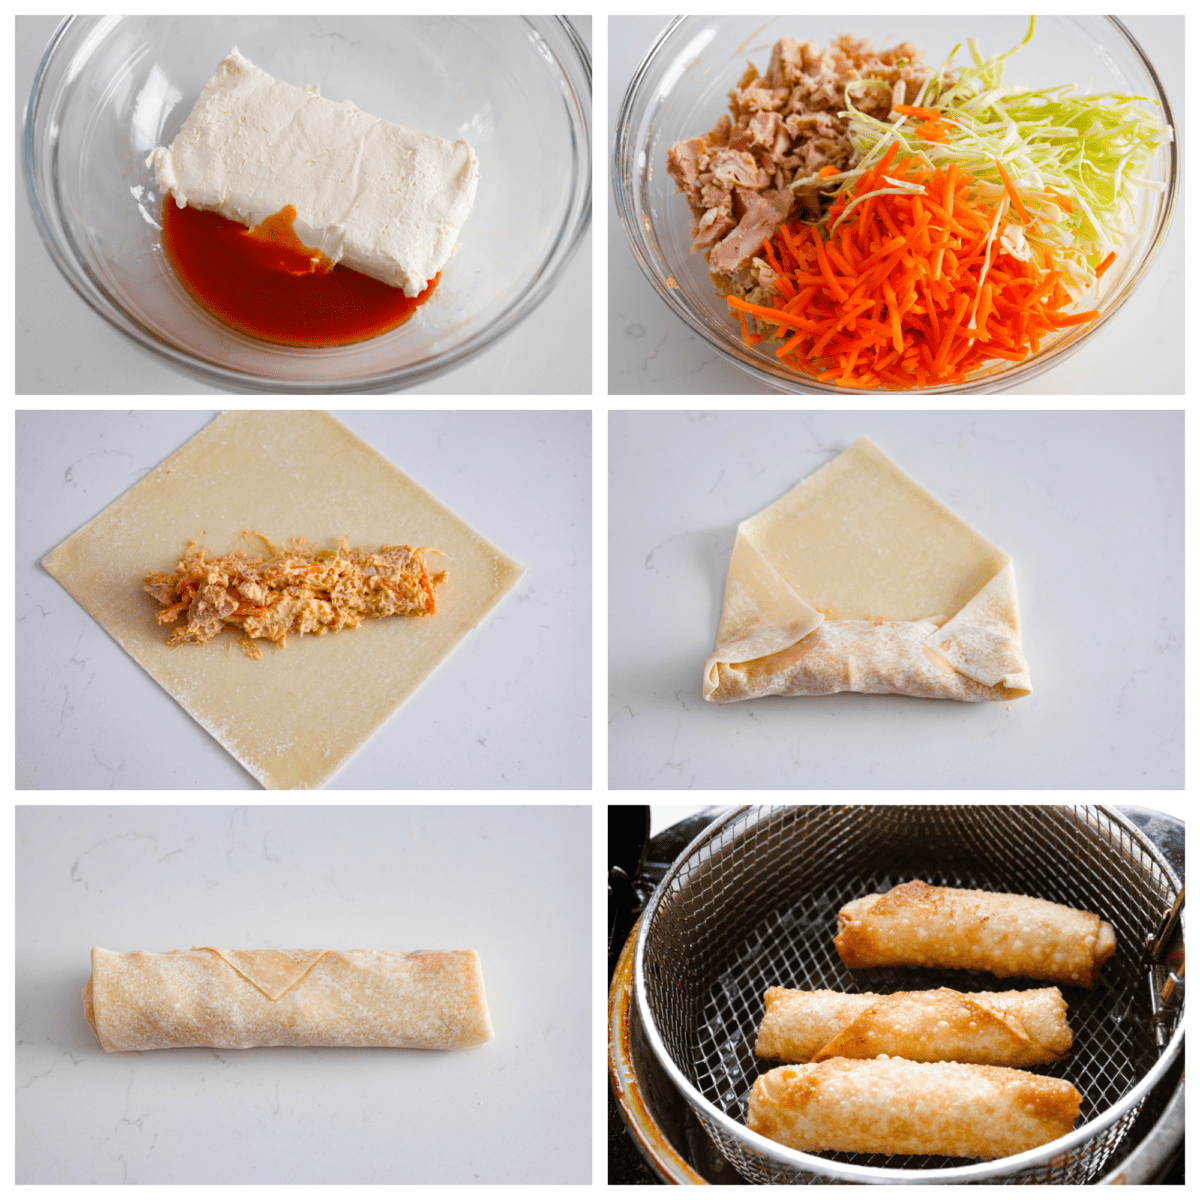 6 pictures in a collage showing the steps on how to assemble the egg rolls. 